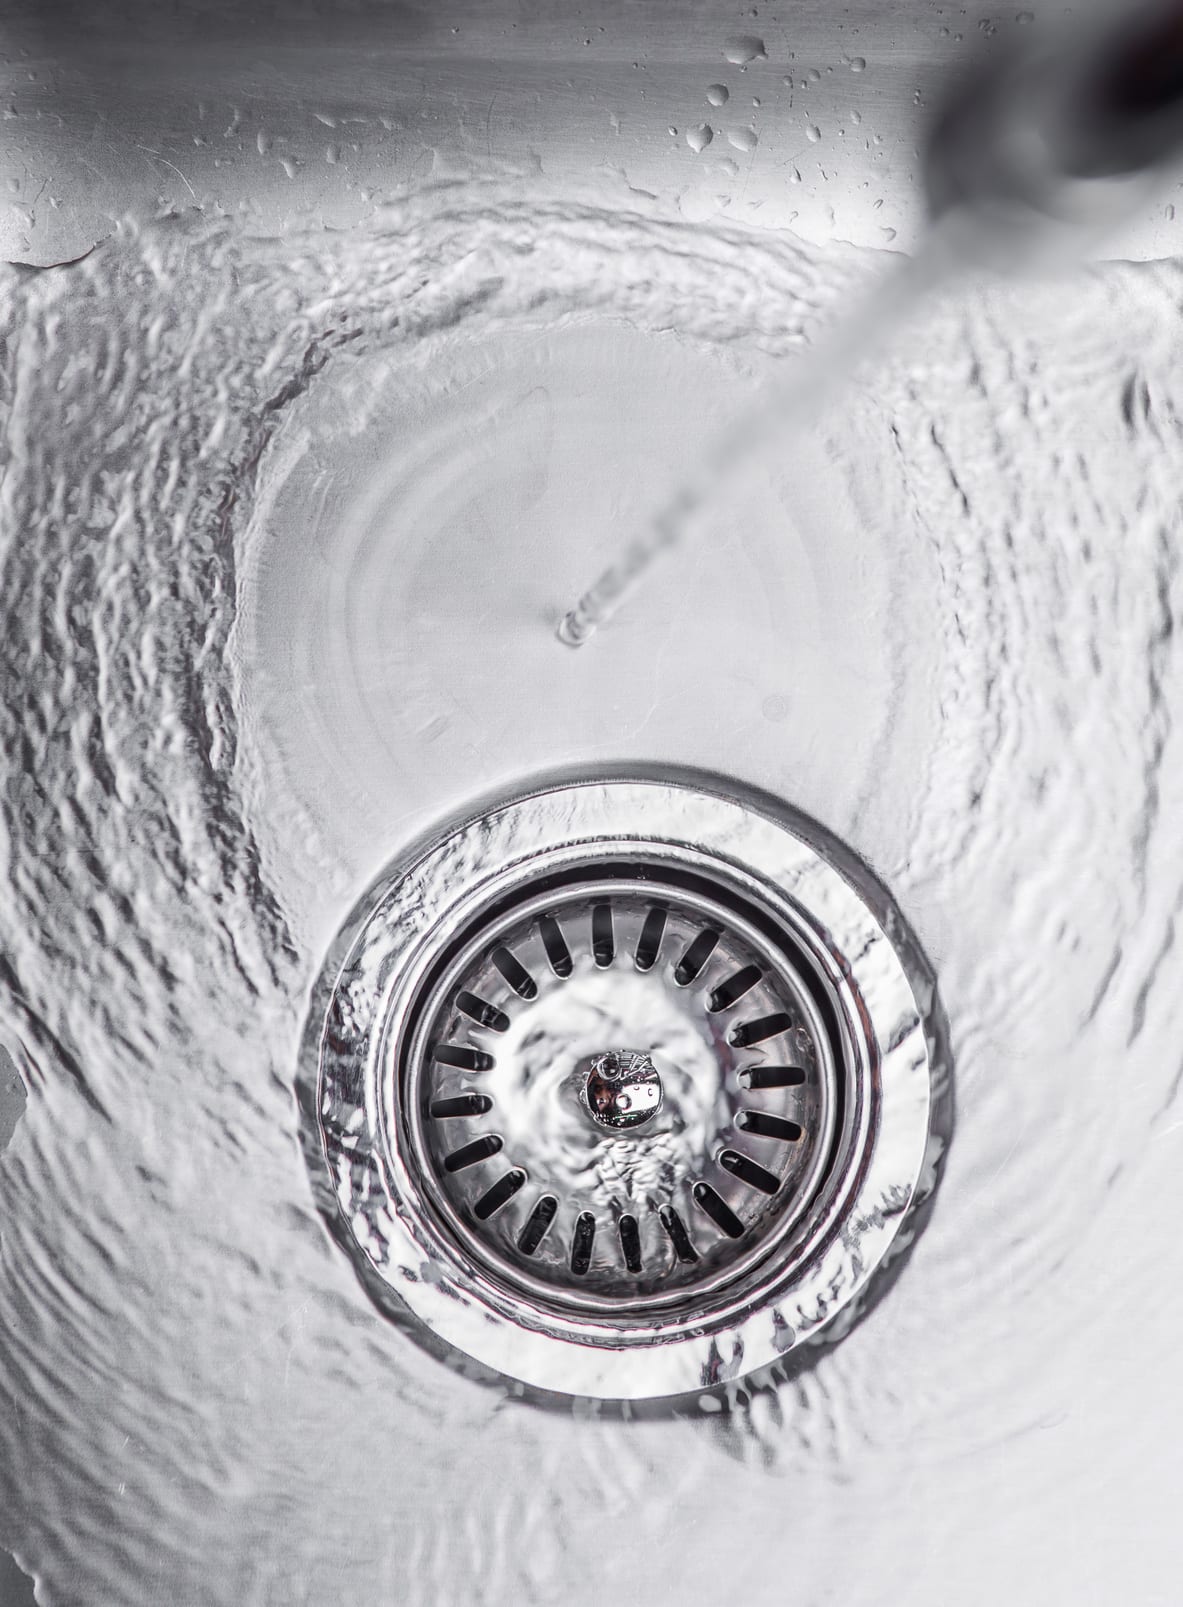 Water flowing down the hole in a kitchen sink